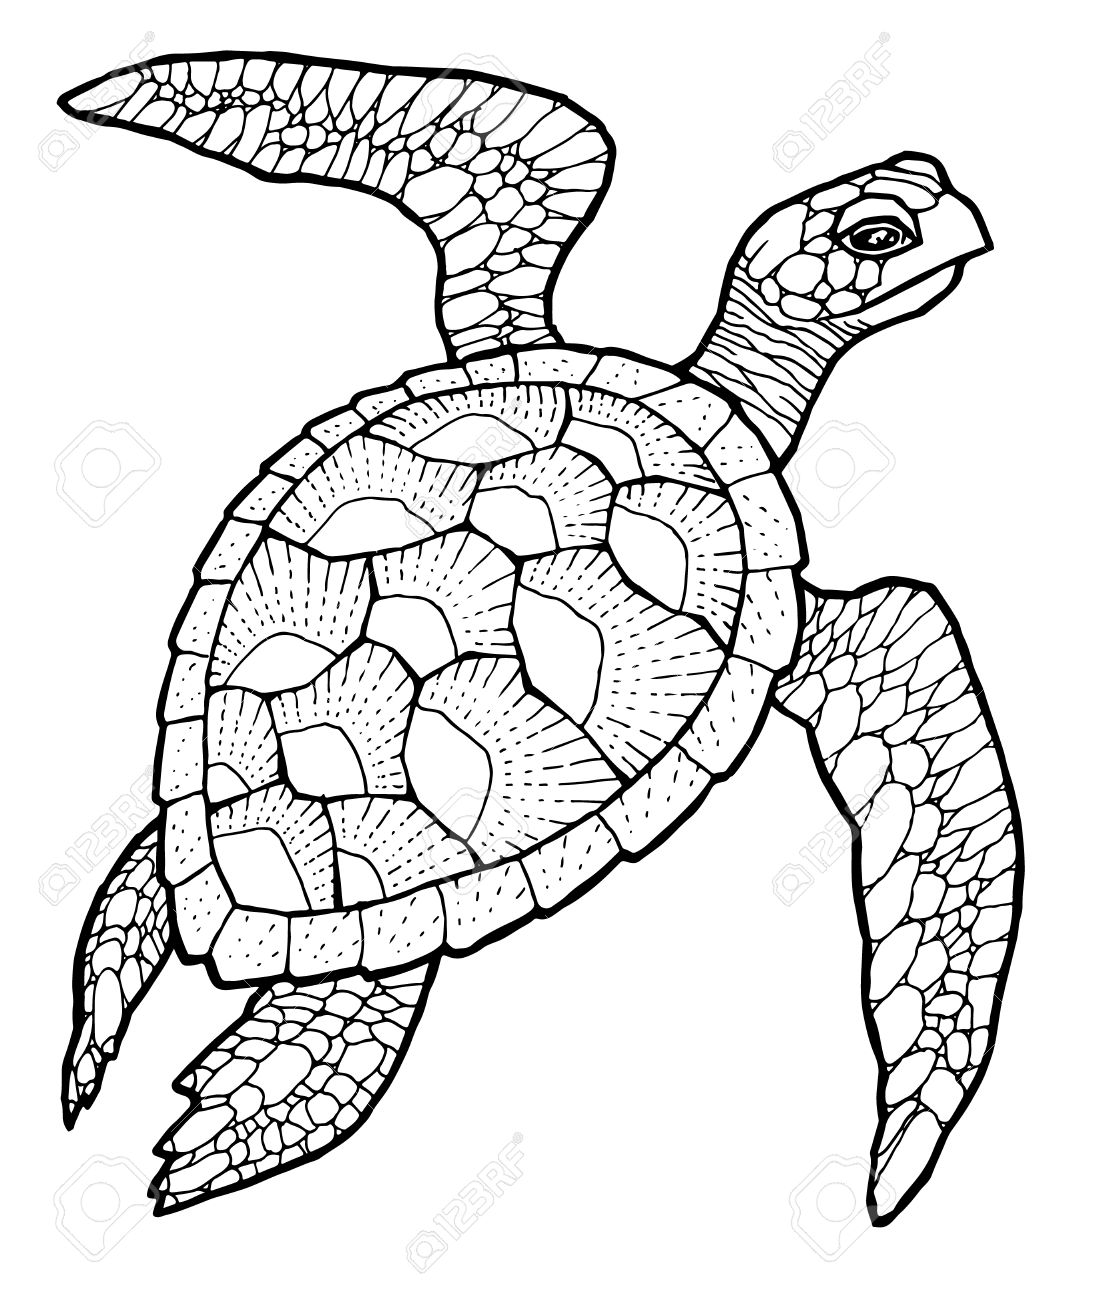 seaturtle drawing easy